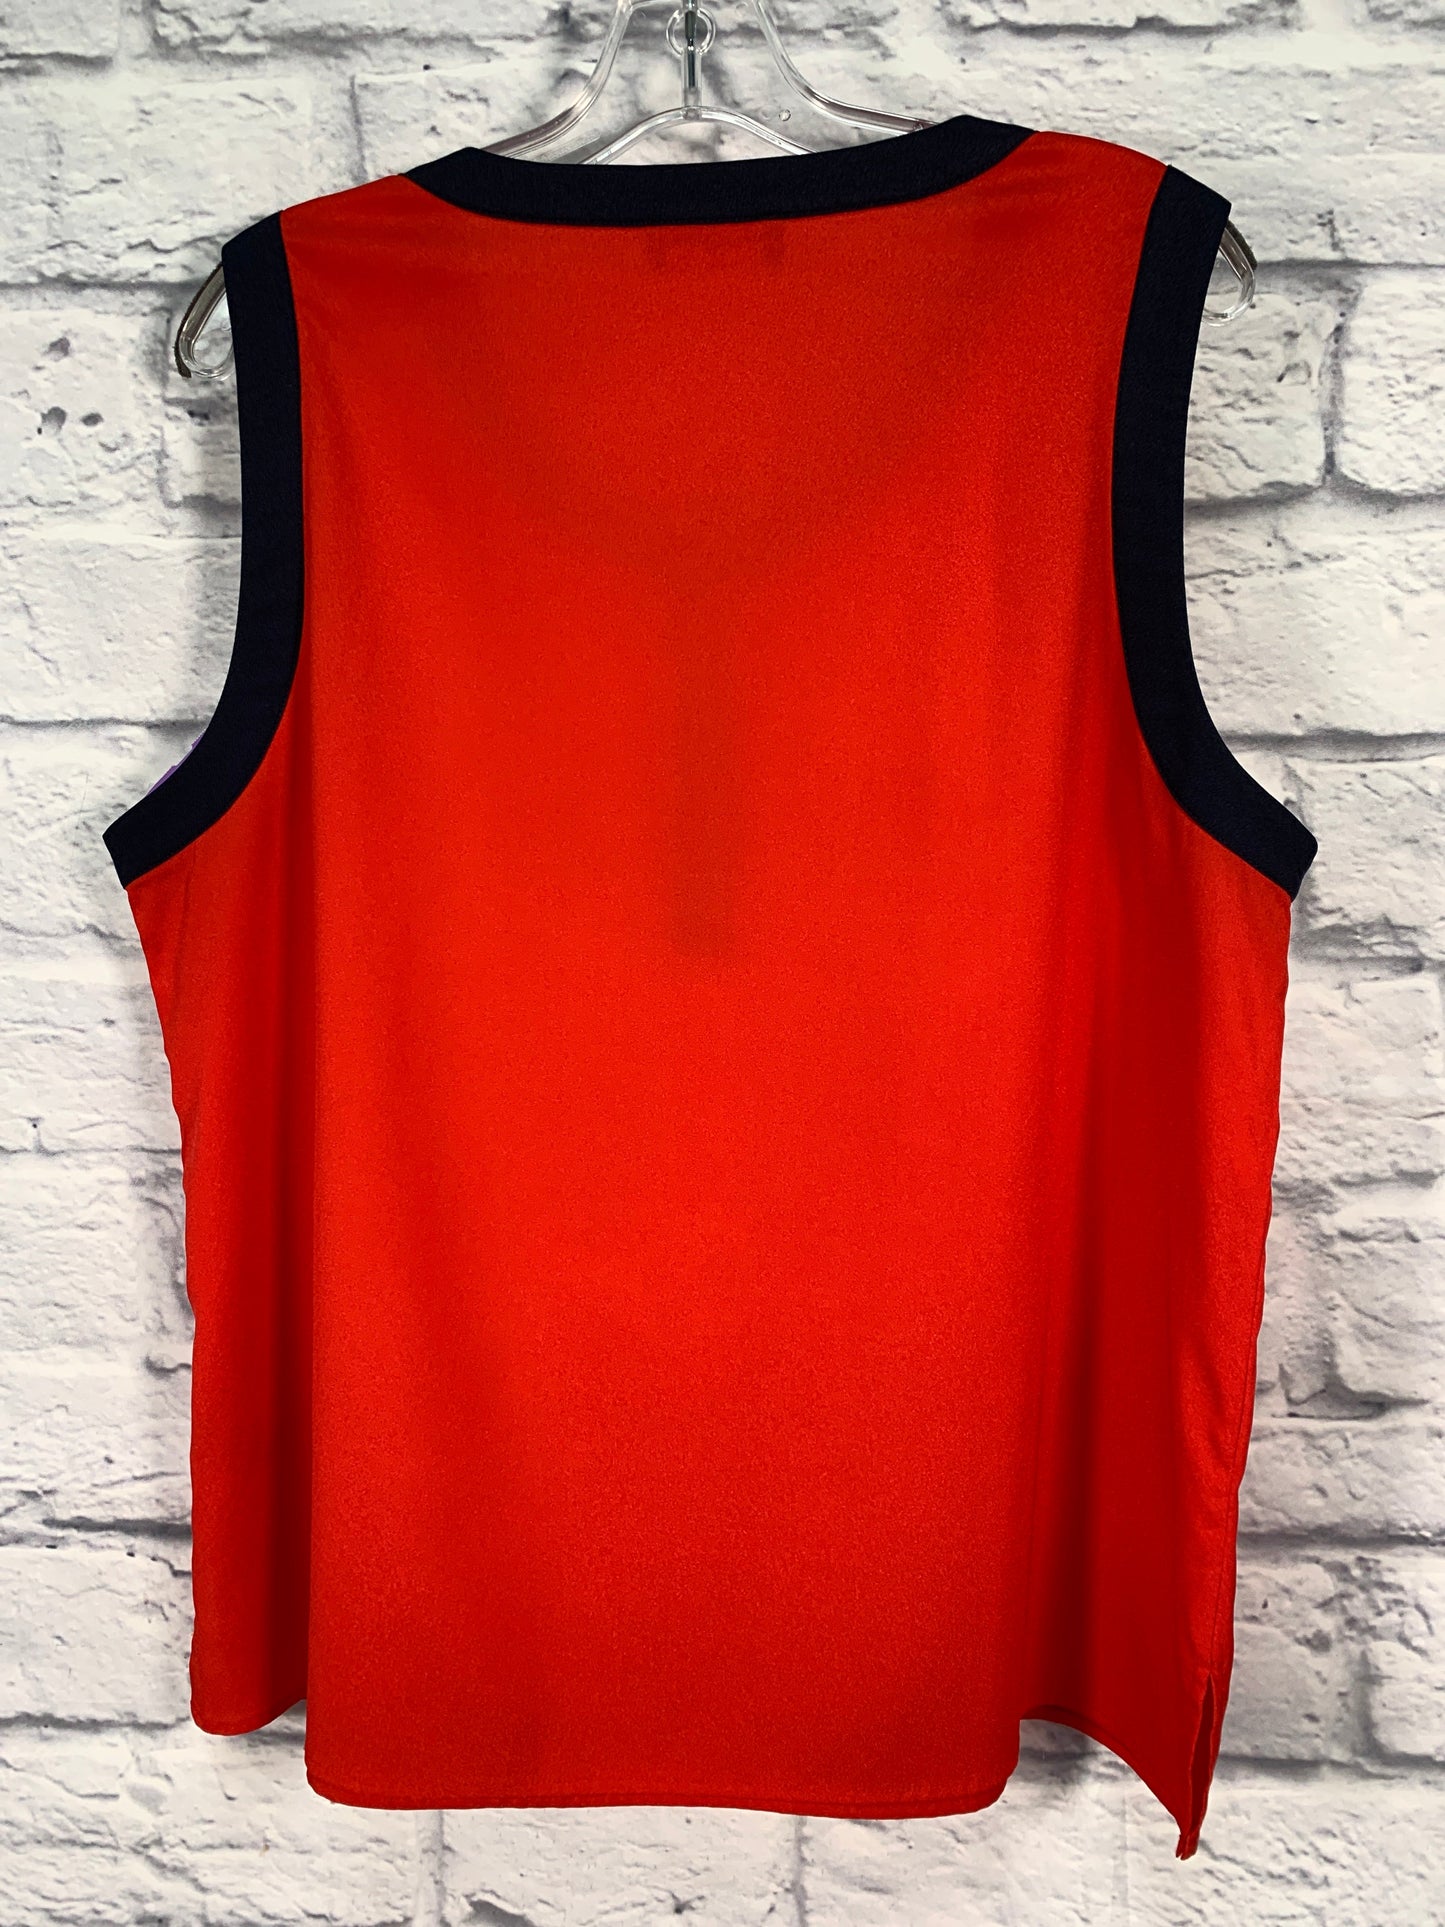 Red Blouse Sleeveless Karl Lagerfeld, Size Xl